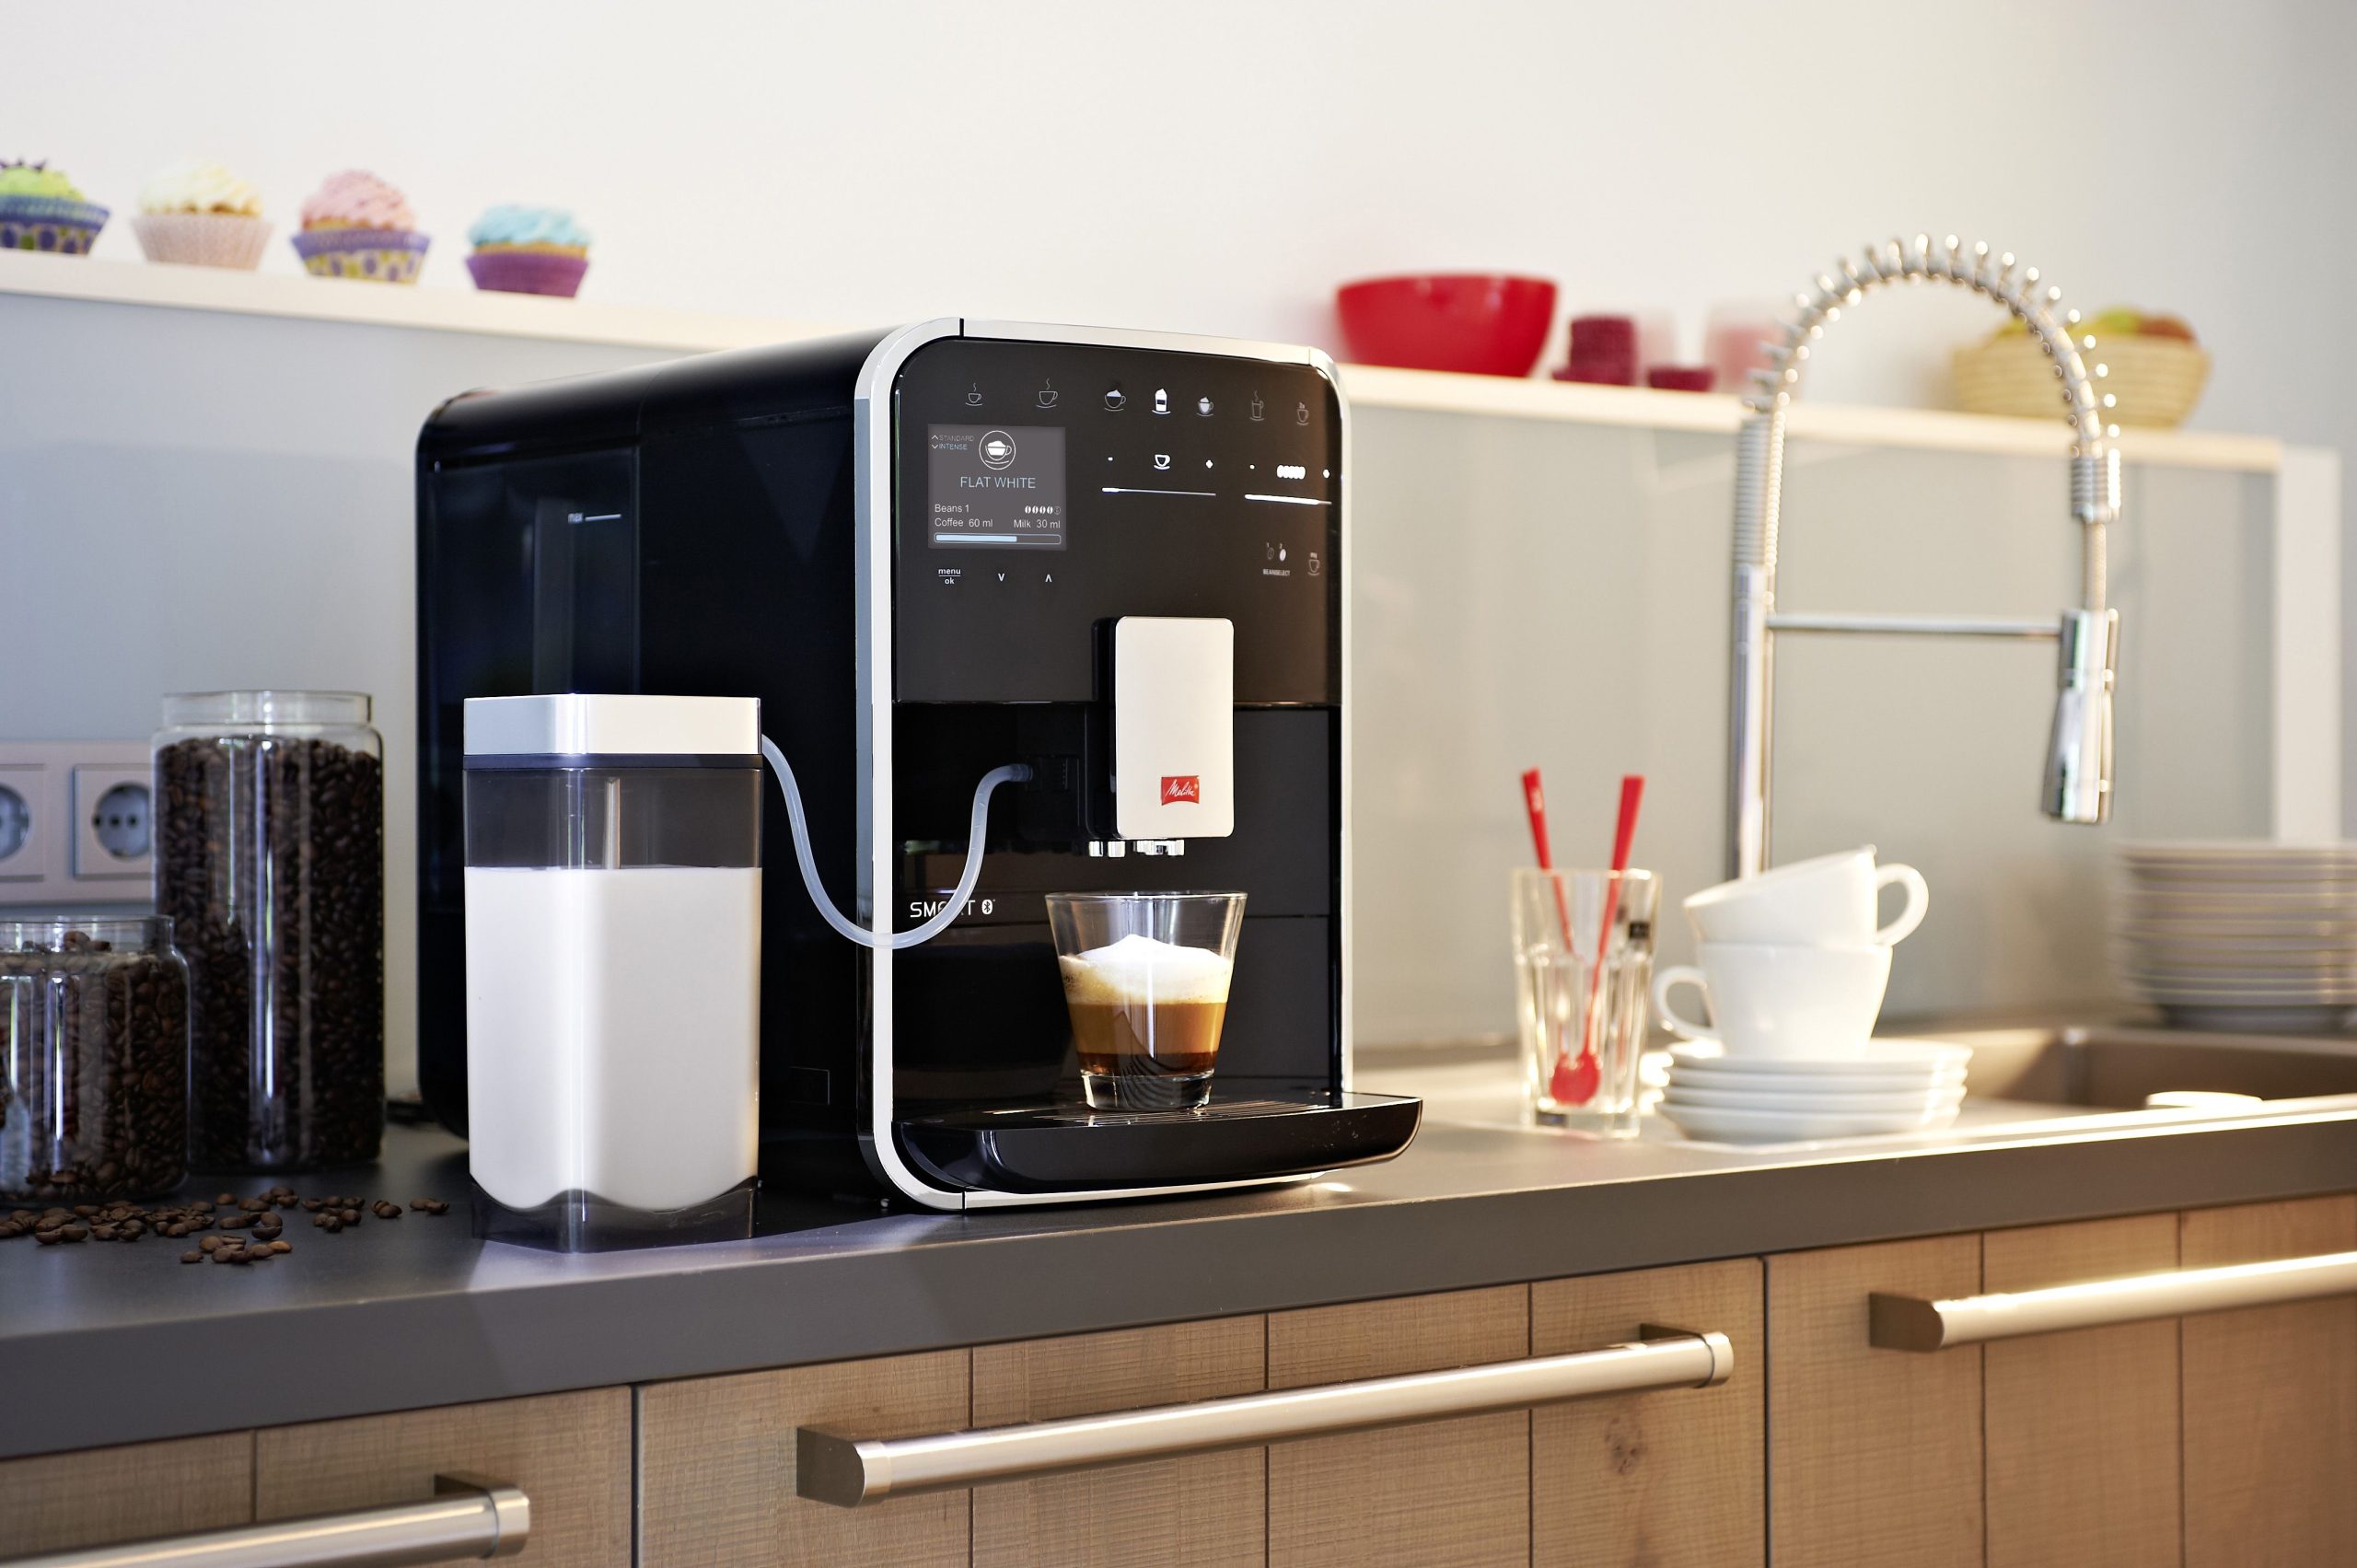 Melitta makes best use of returned items to increase its electronic circularity